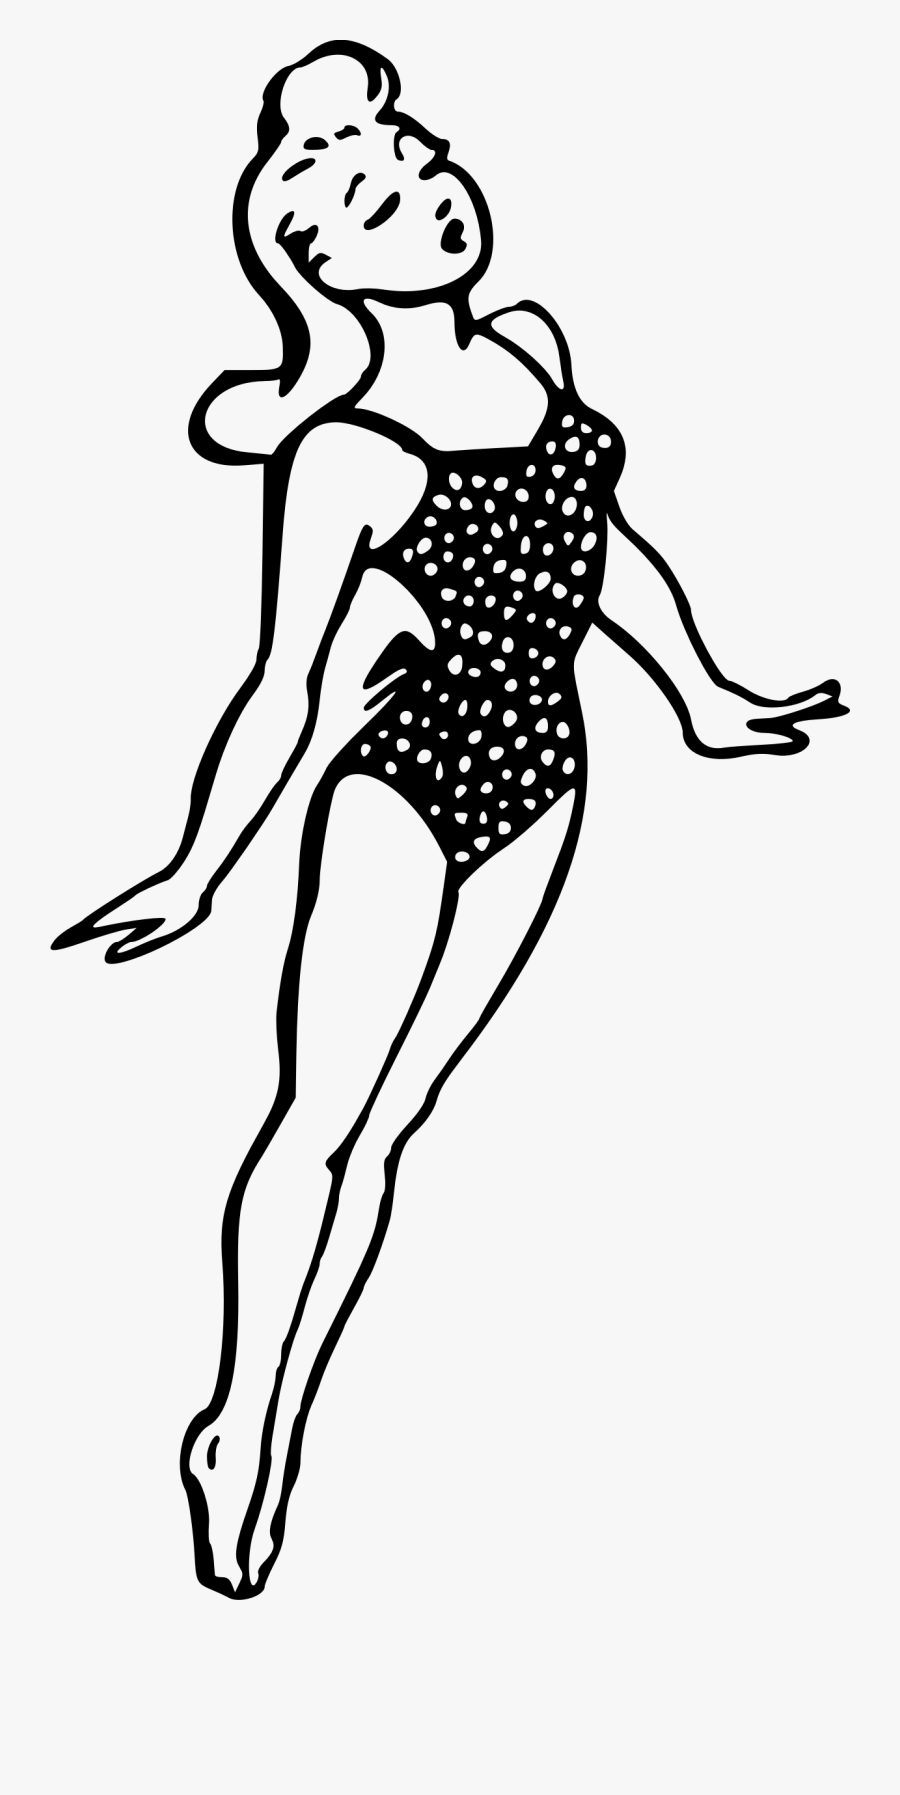 Lady In Swimsuit Clip Arts - Portable Network Graphics, Transparent Clipart